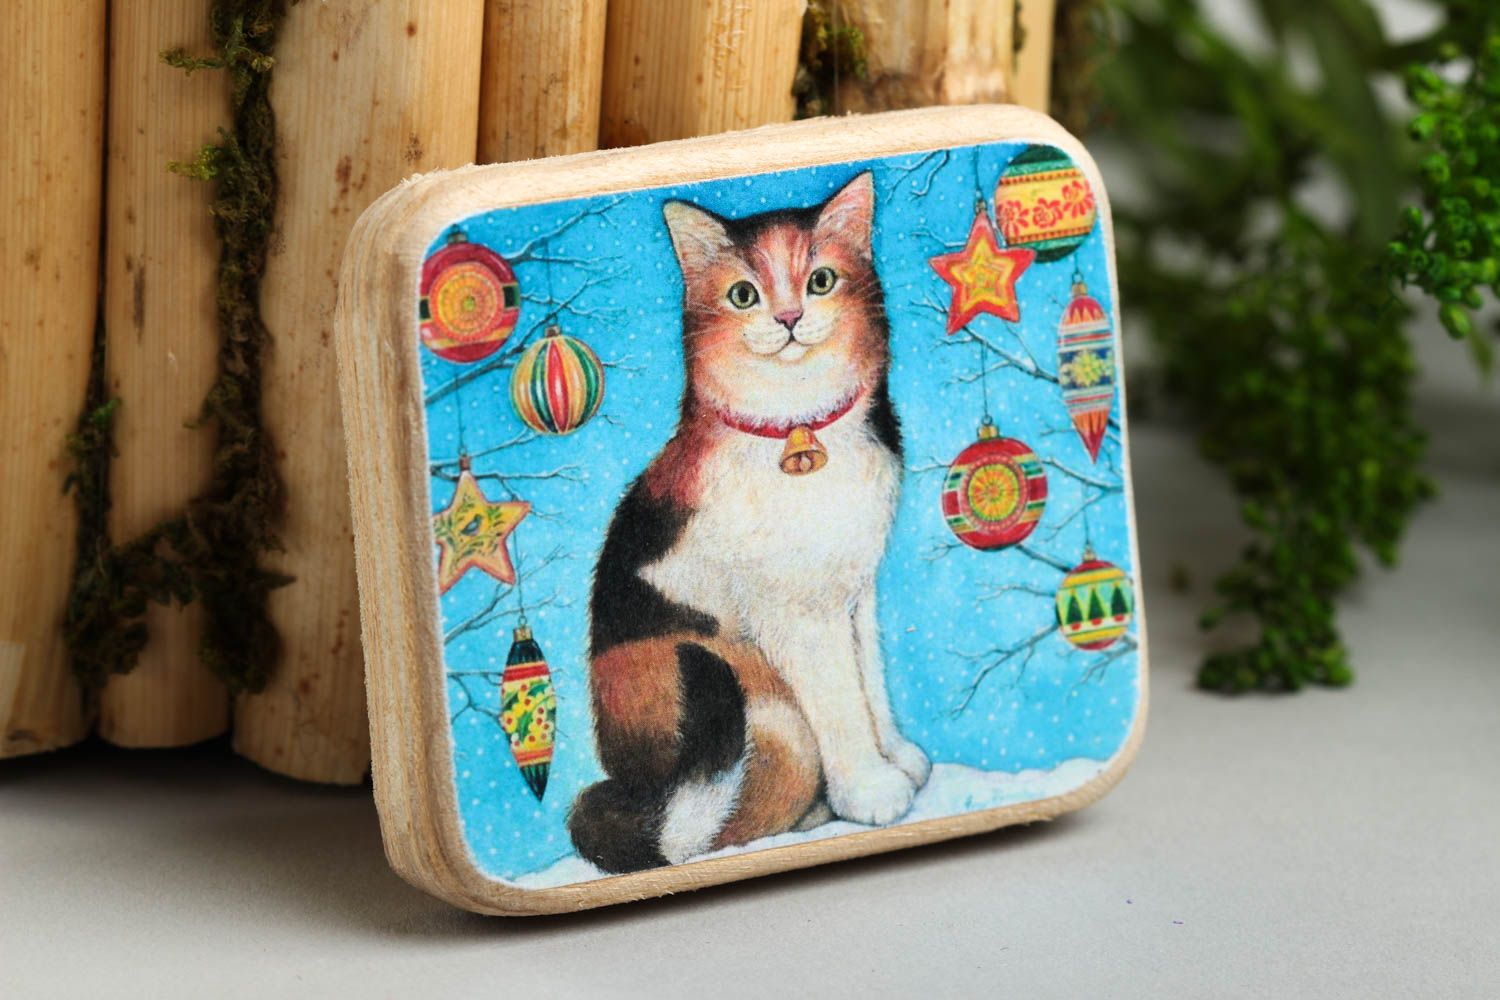 Handmade decorations wooden fridge magnet for decorative use only cool gifts photo 1